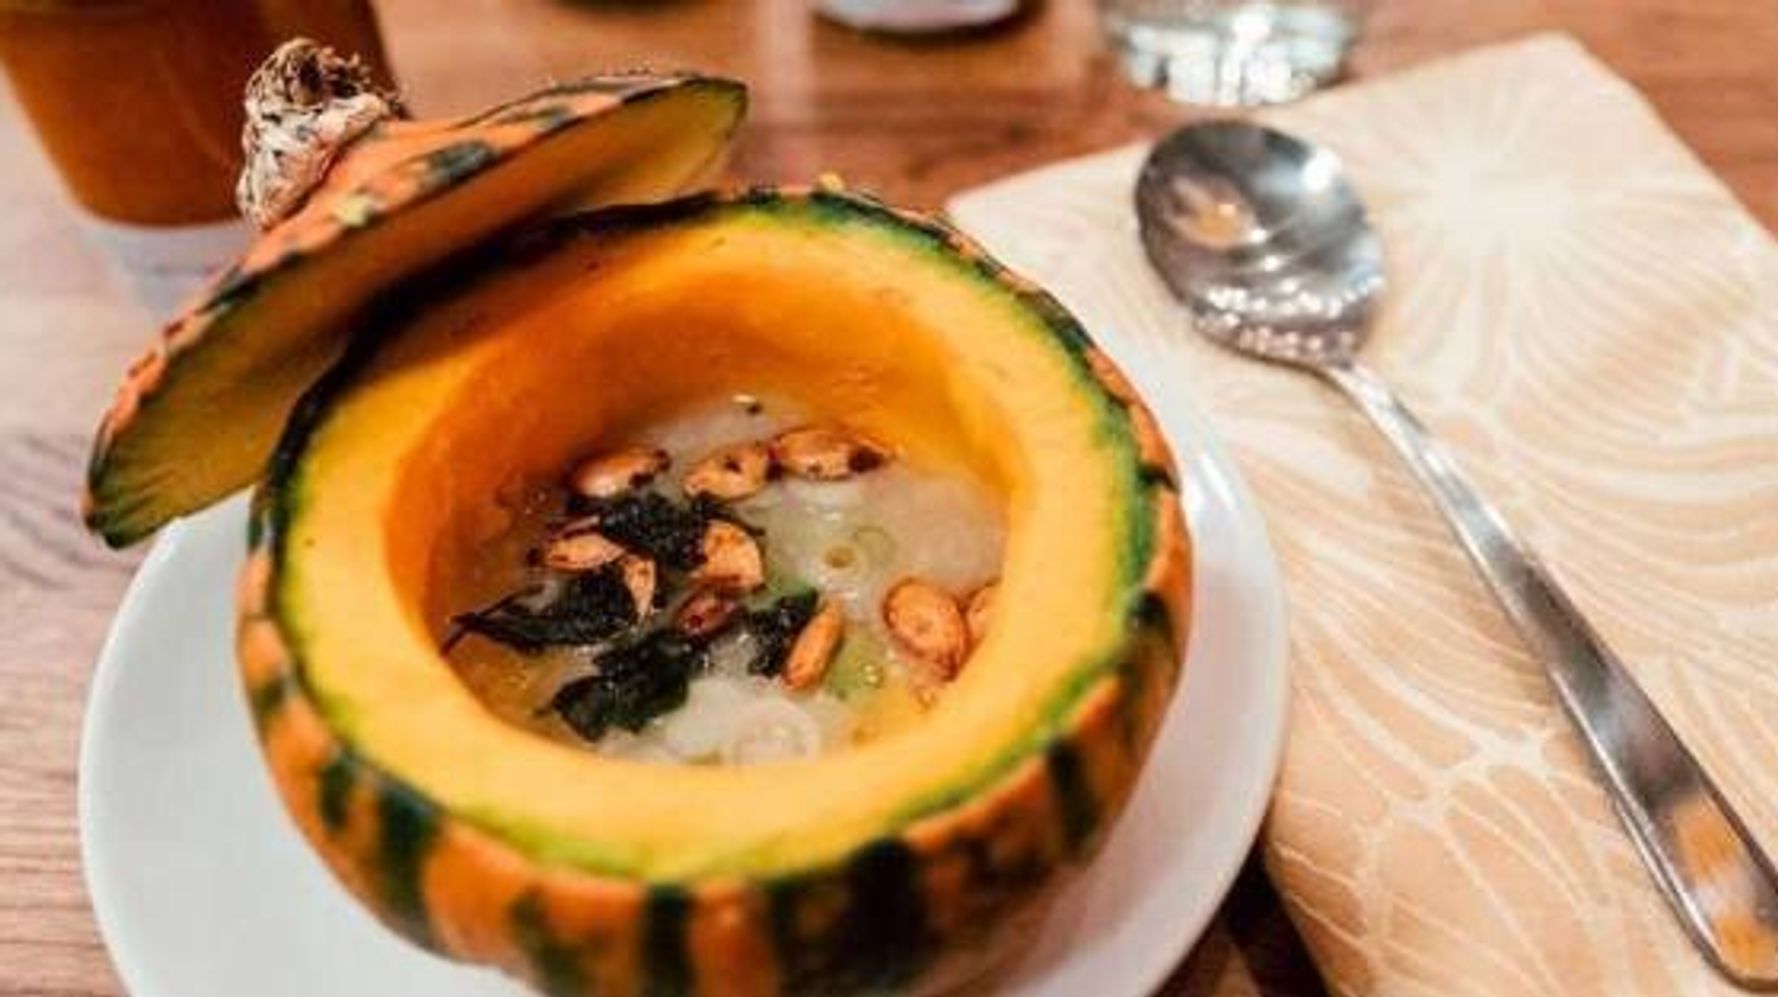 Food Waste Upcycled Into 6-Course Vancouver Gourmet Meal | HuffPost ...